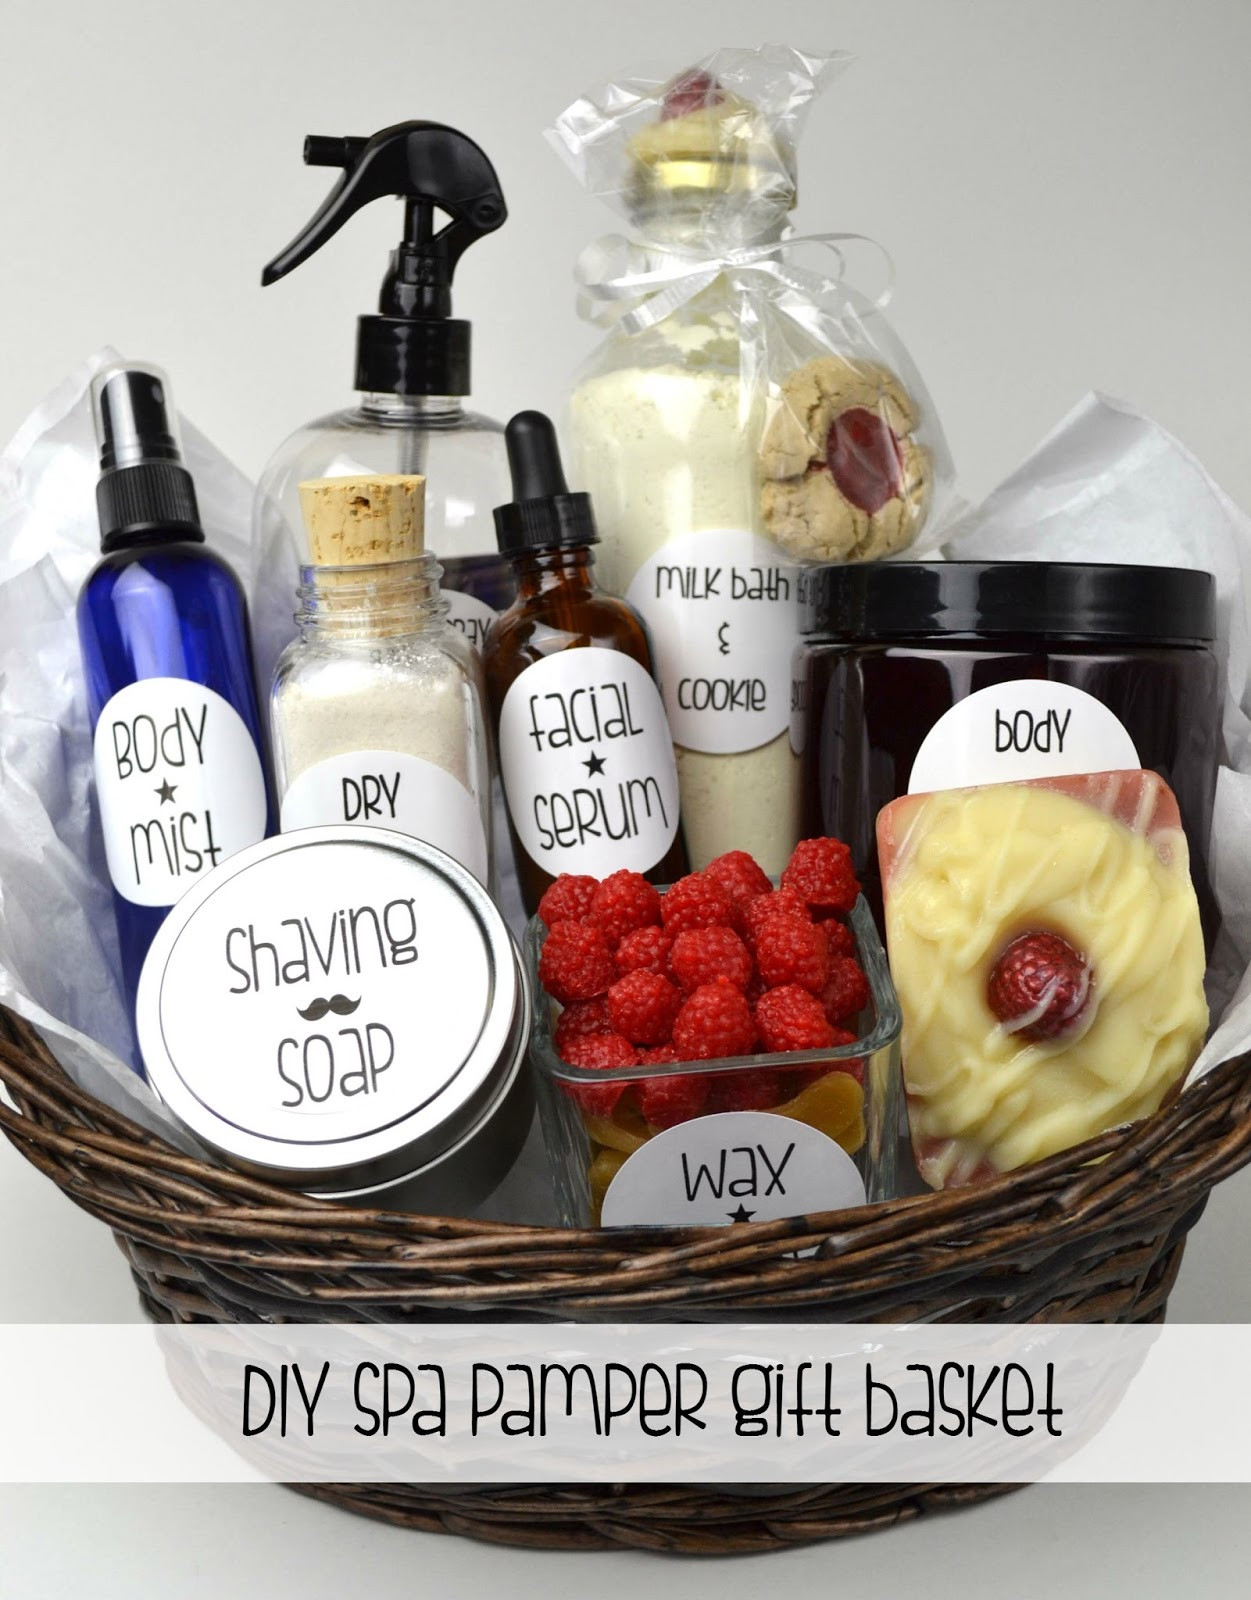 Best ideas about DIY Gift Basket
. Save or Pin Oil & Butter DIY Spa Pamper Gift Basket Now.